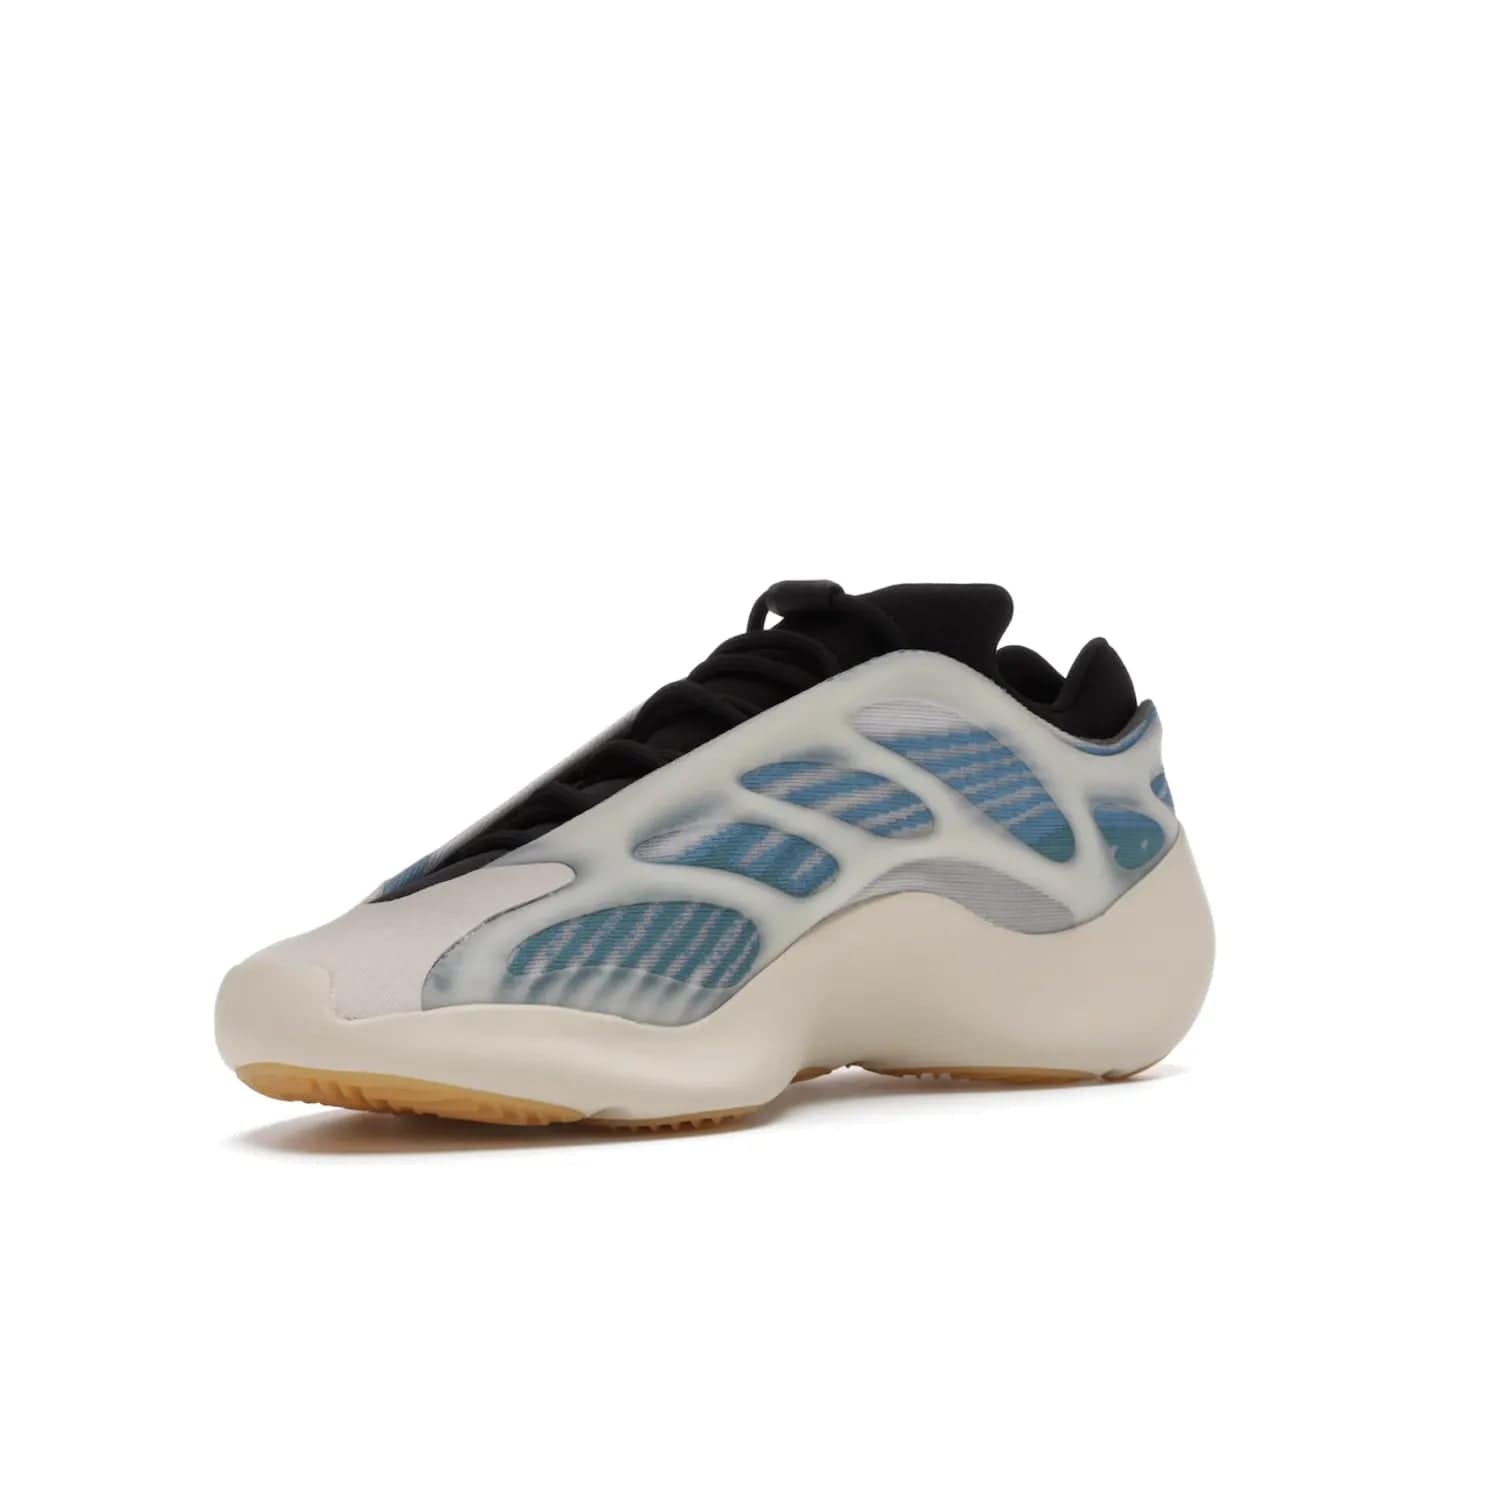 adidas Yeezy 700 V3 Kyanite - Image 15 - Only at www.BallersClubKickz.com - The adidas Yeezy 700 V3 Kyanite offers a layered design featuring a glow-in-the-dark TPU cage and a tonal cream-colored EVA foam midsole. With its herringbone-patterned outsole, the style and comfort of the sneaker will accompany you anywhere. Released in March 2021, it's a great addition to any sneaker wardrobe.